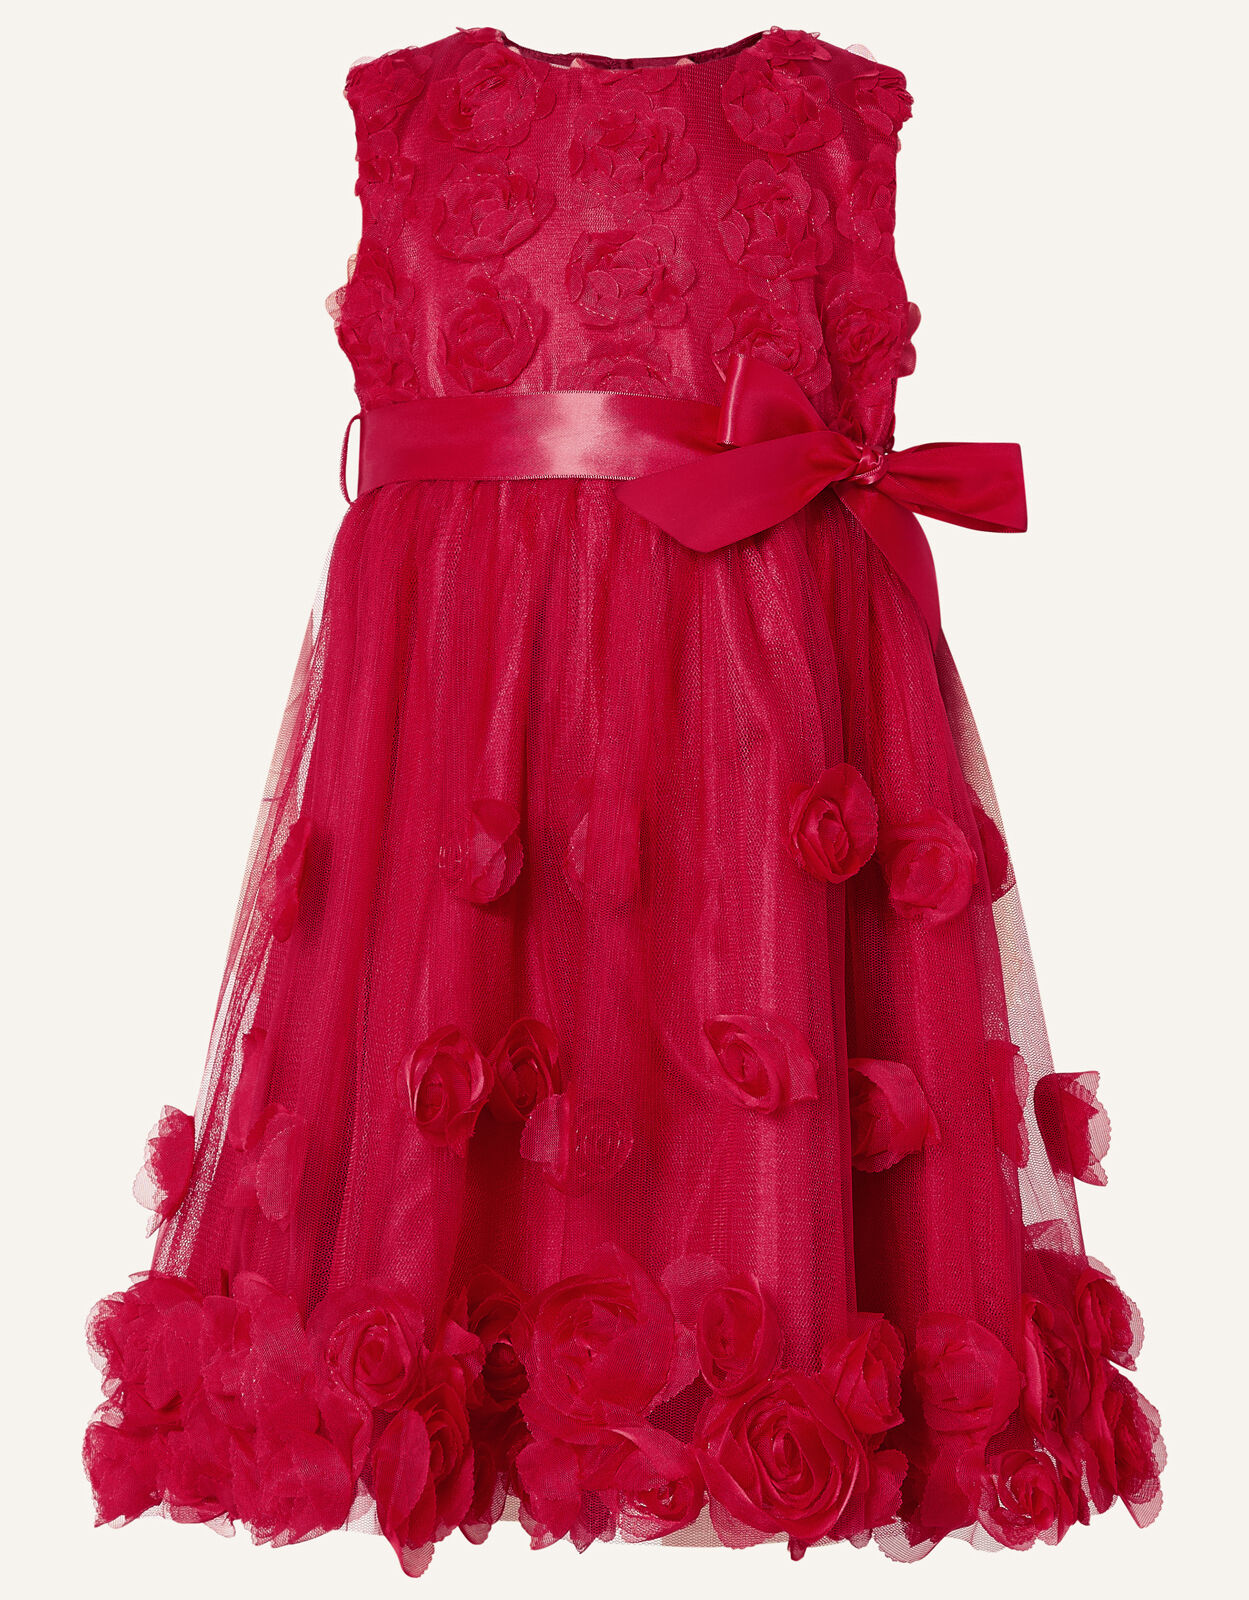 Baby 3D Rose Dress Red | Baby Girl ...